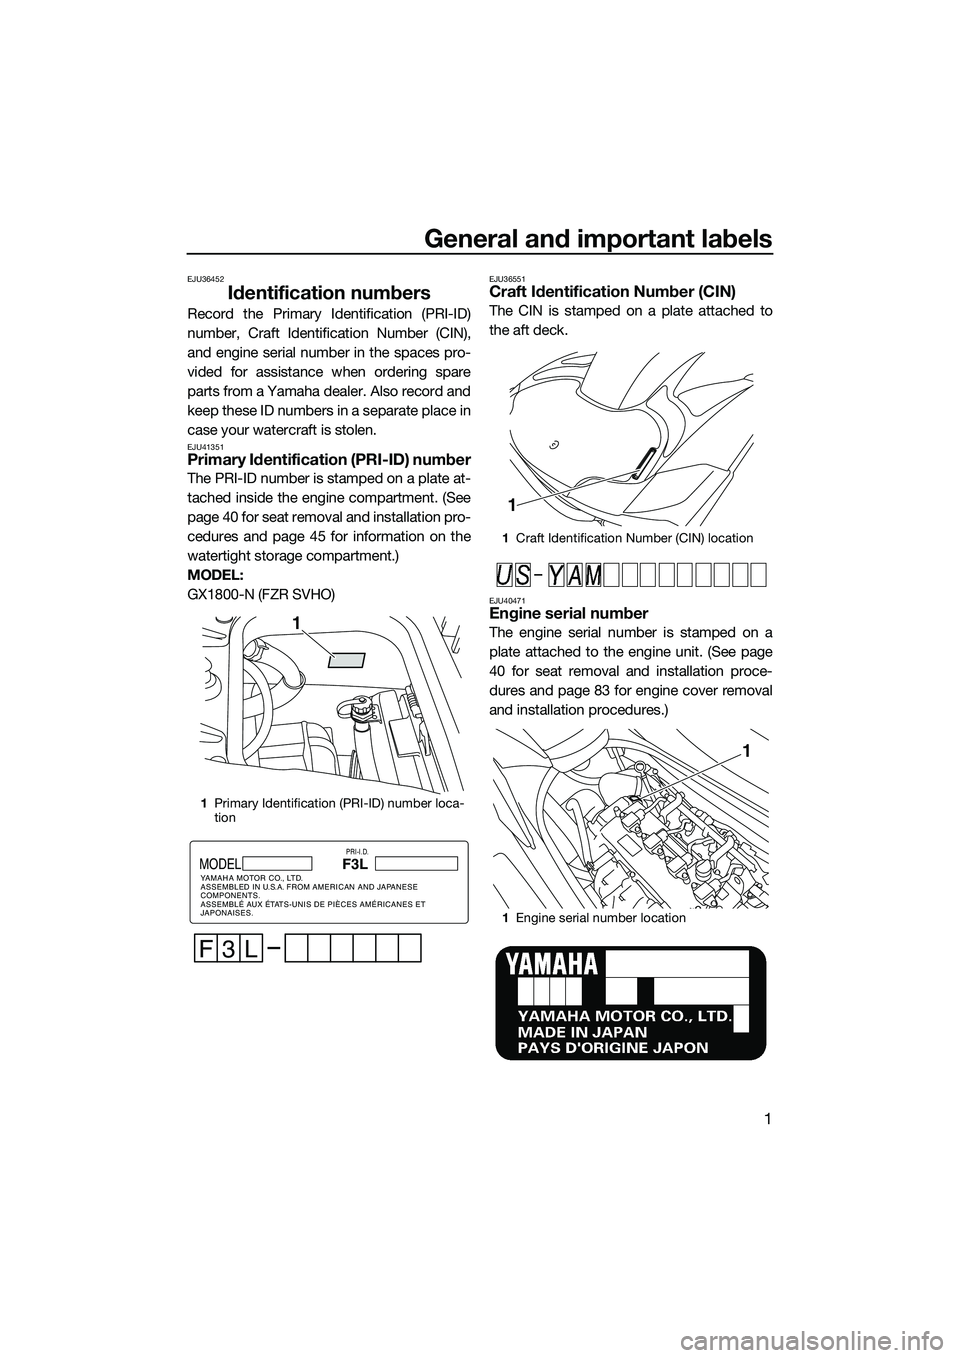 YAMAHA FZR SVHO 2014  Owners Manual General and important labels
1
EJU36452
Identification numbers
Record the Primary Identification (PRI-ID)
number, Craft Identification Number (CIN),
and engine serial number in the spaces pro-
vided f